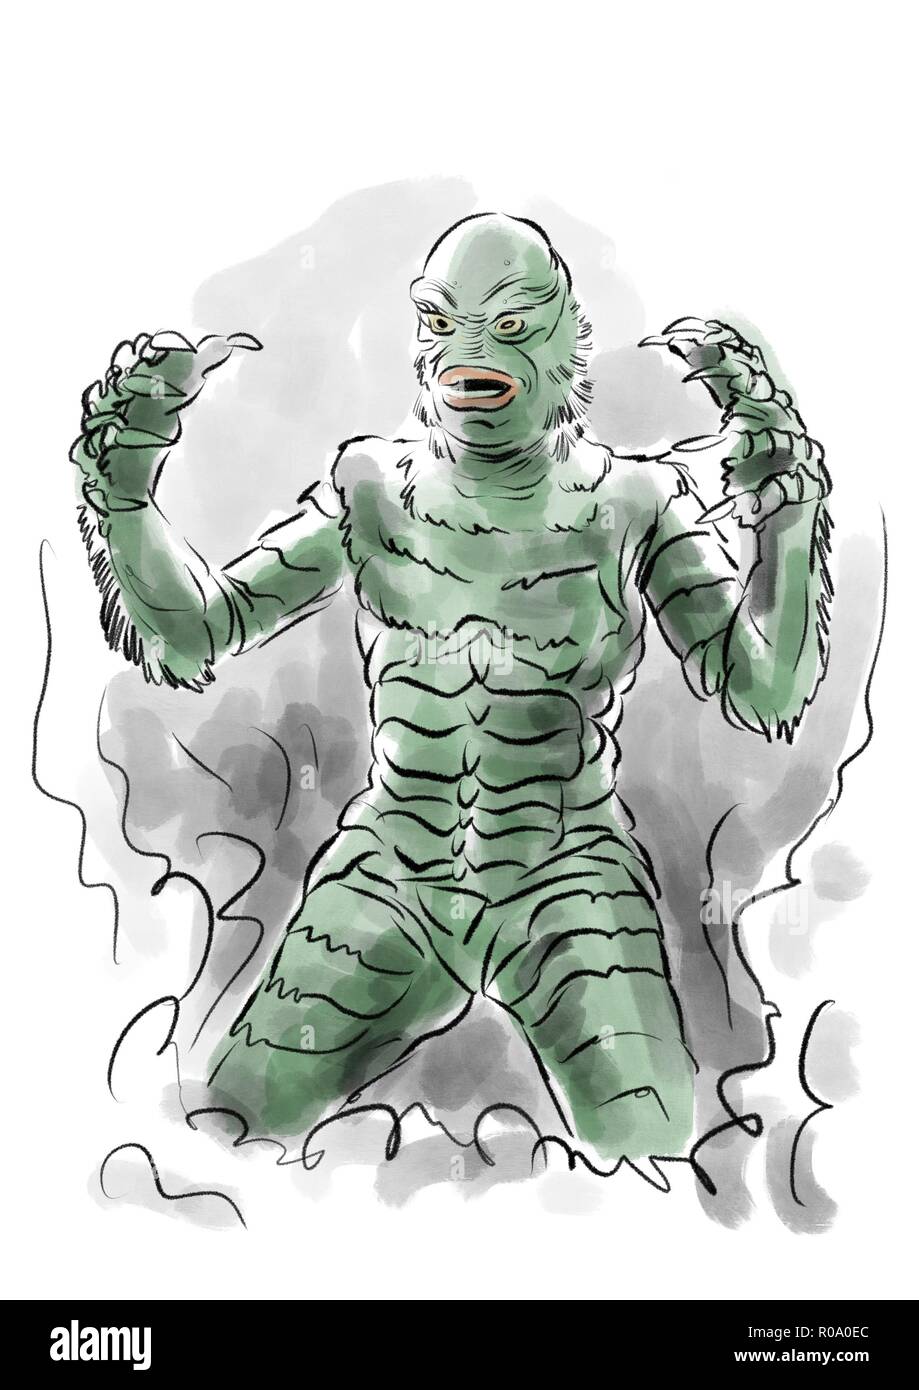 illustration of gillman from the creature from the black lagoon film movie Stock Photo